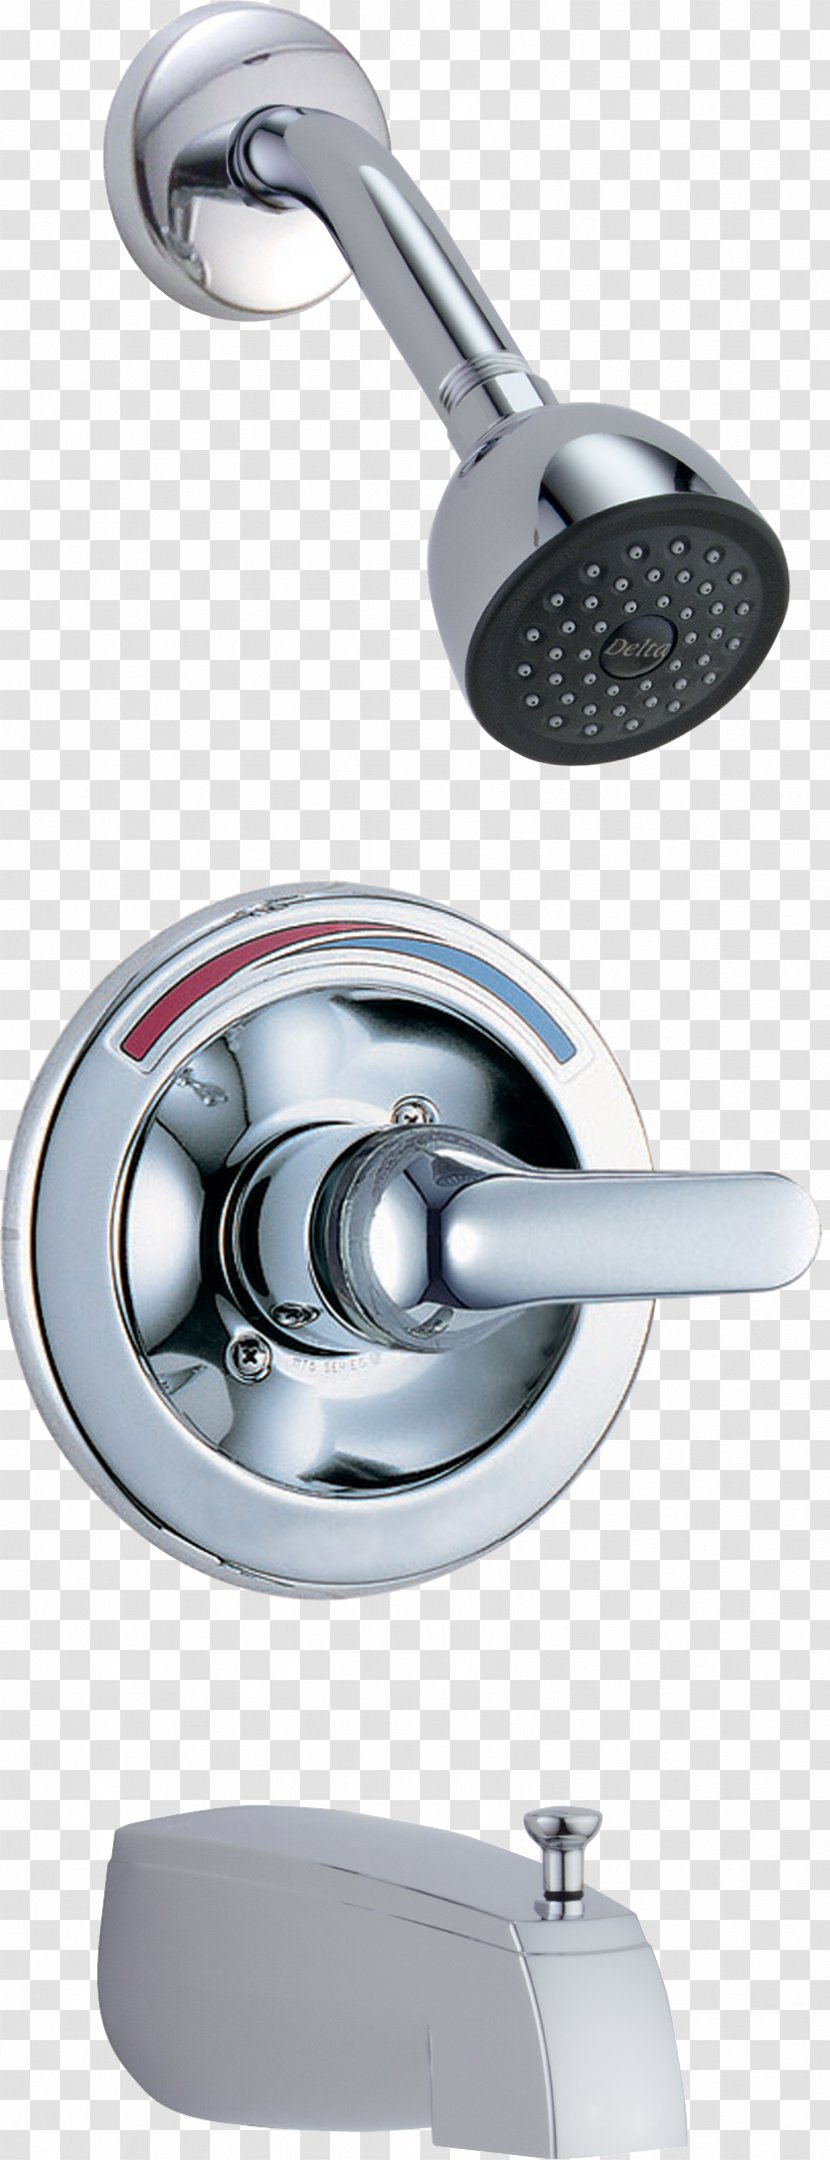 Shower Tap Pressure-balanced Valve Thermostatic Mixing - Stainless Steel Transparent PNG